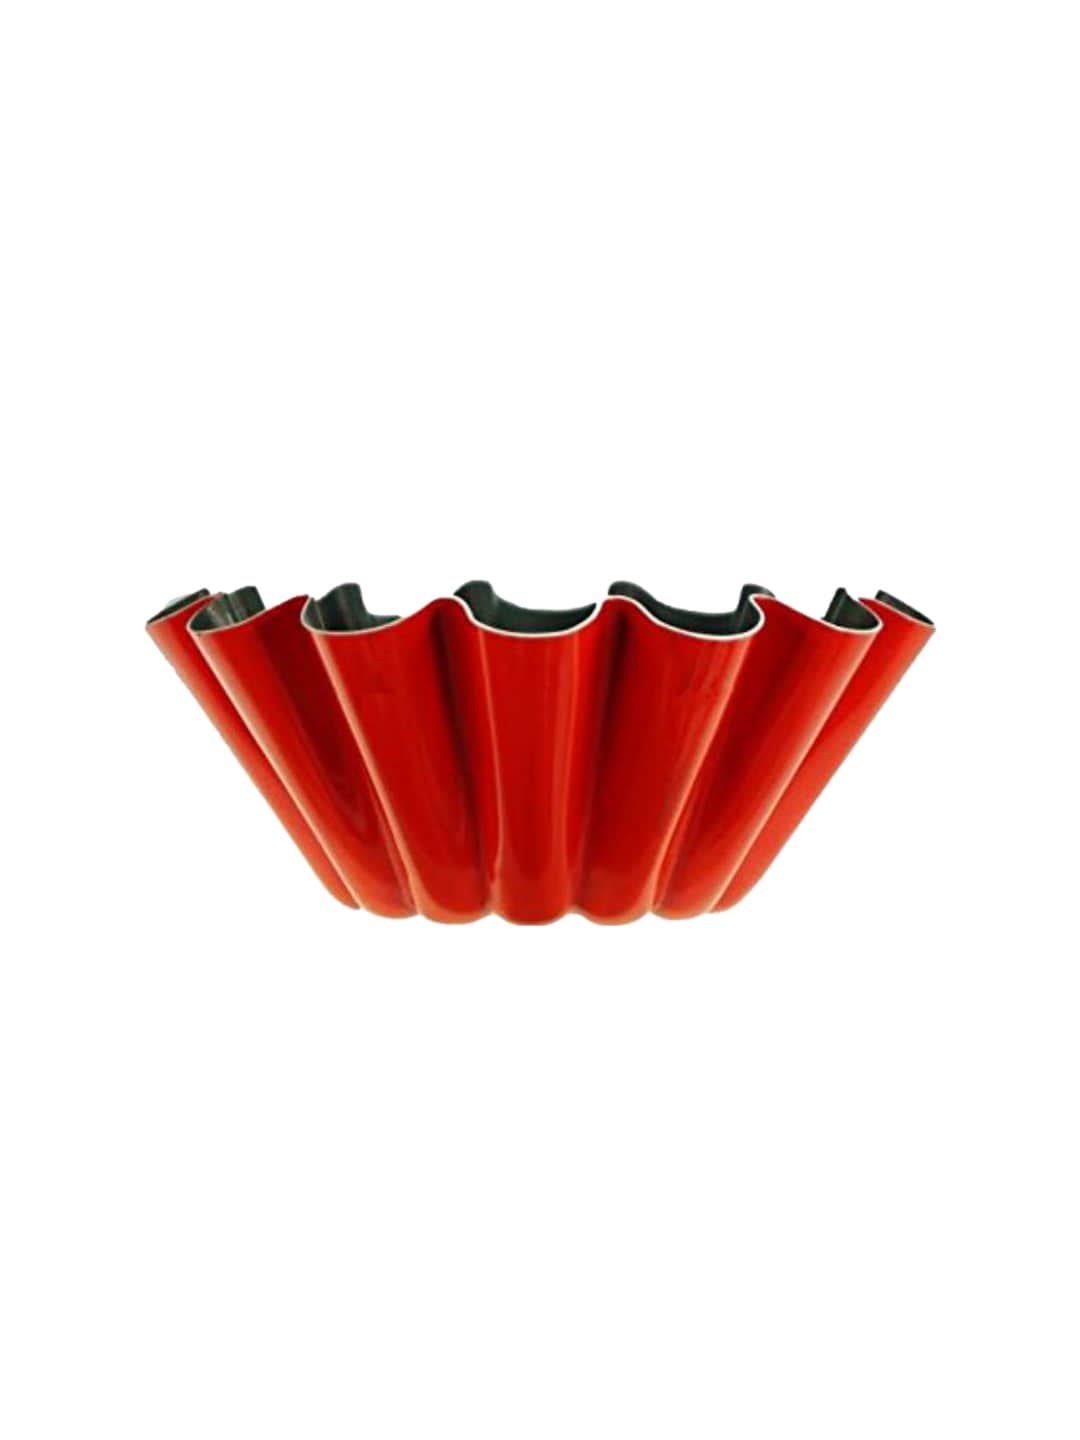 Wonderchef Red Pudding Mould Price in India